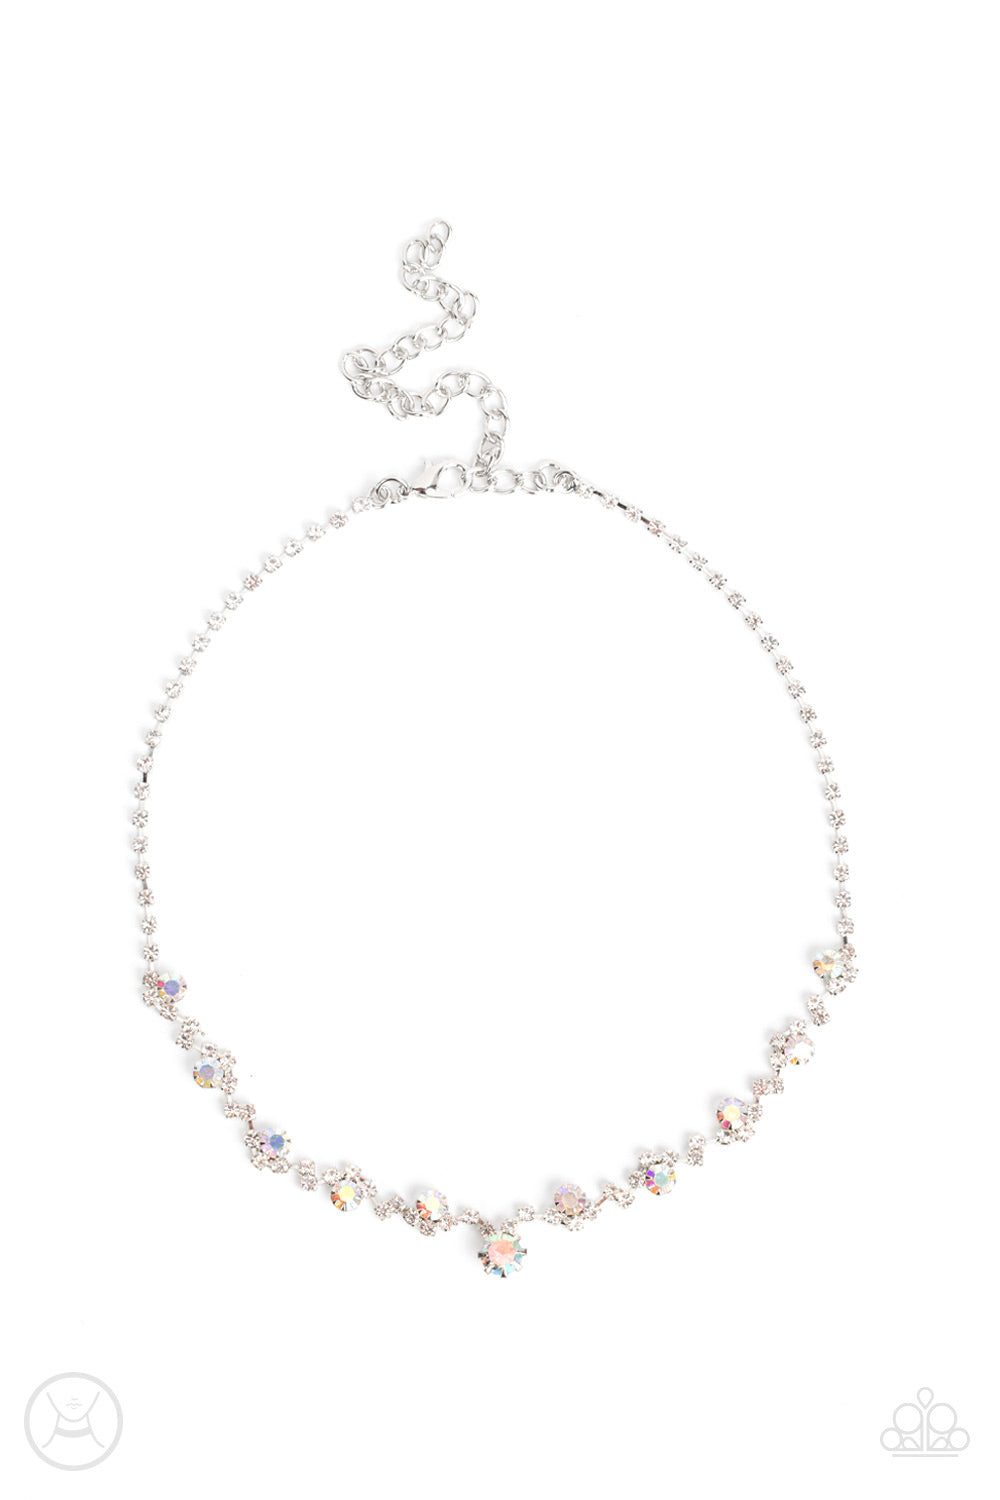 Regal Rebel Multi Choker Necklace - Paparazzi Accessories   Featuring pronged silver fittings, pairs and clusters of dainty white and iridescent rhinestones delicately connect to a strand of icy white rhinestones around the neck for a regal attitude. Features an adjustable clasp closure.  Sold as one individual choker necklace. Includes one pair of matching earrings.